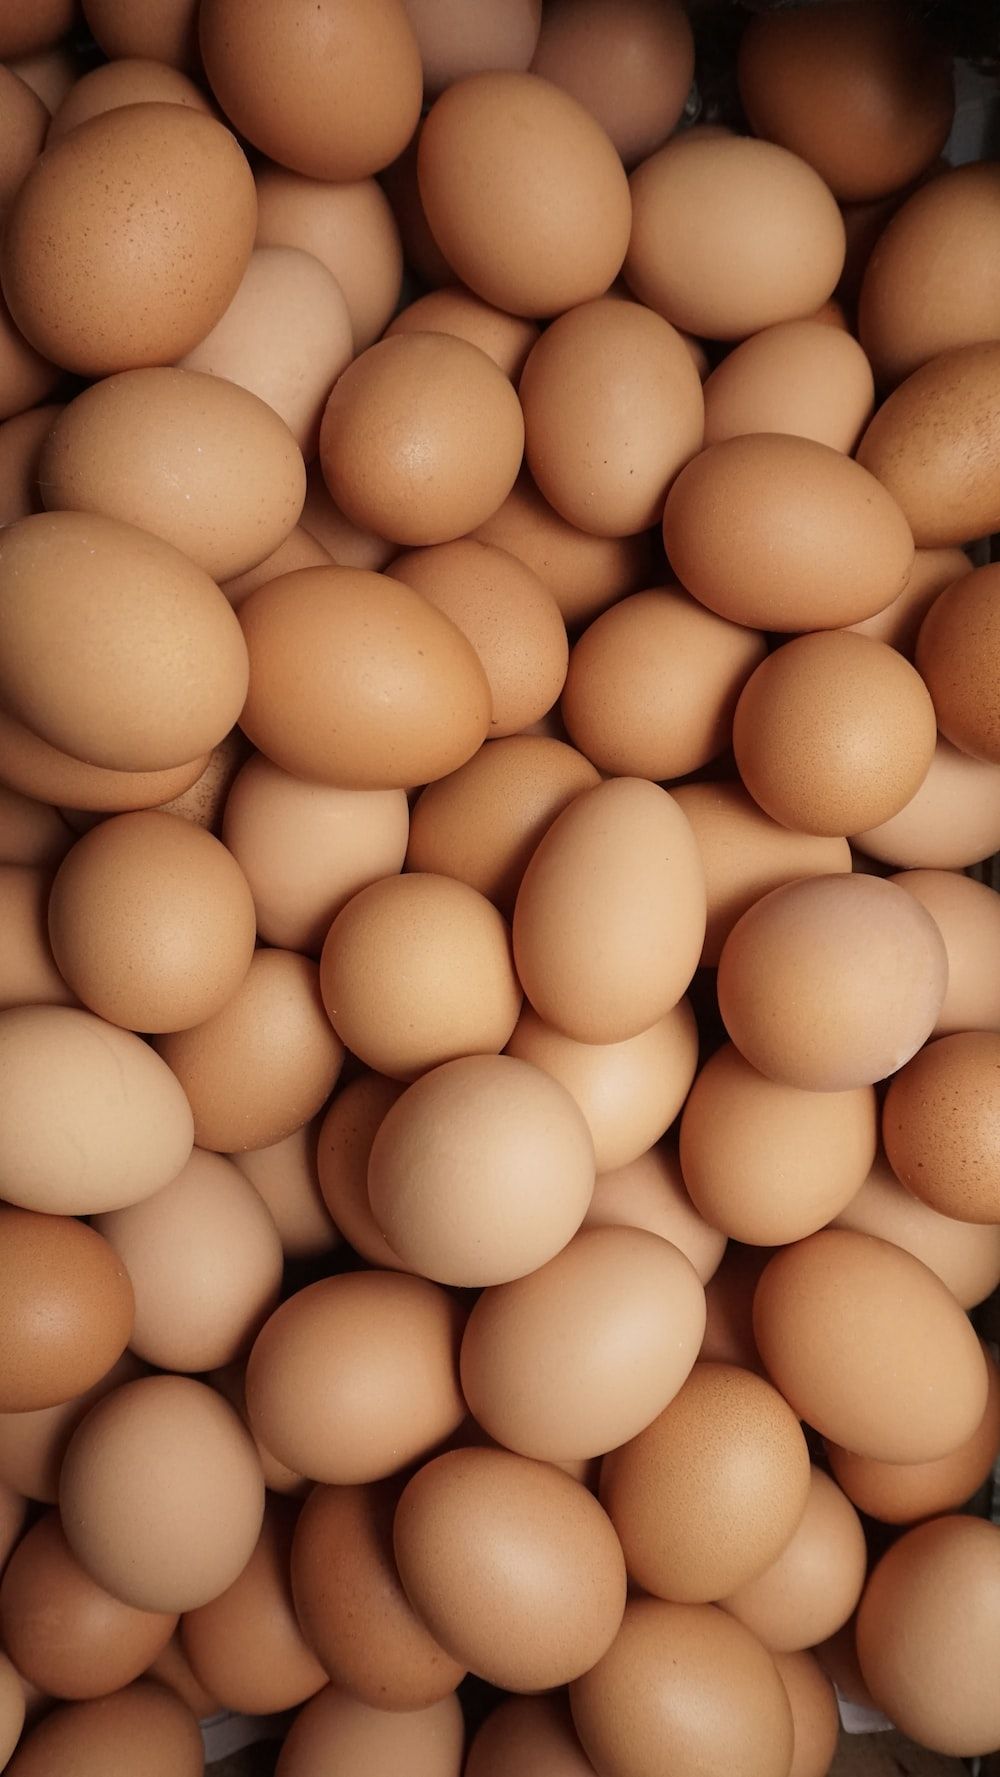 A pile of brown eggs - Egg